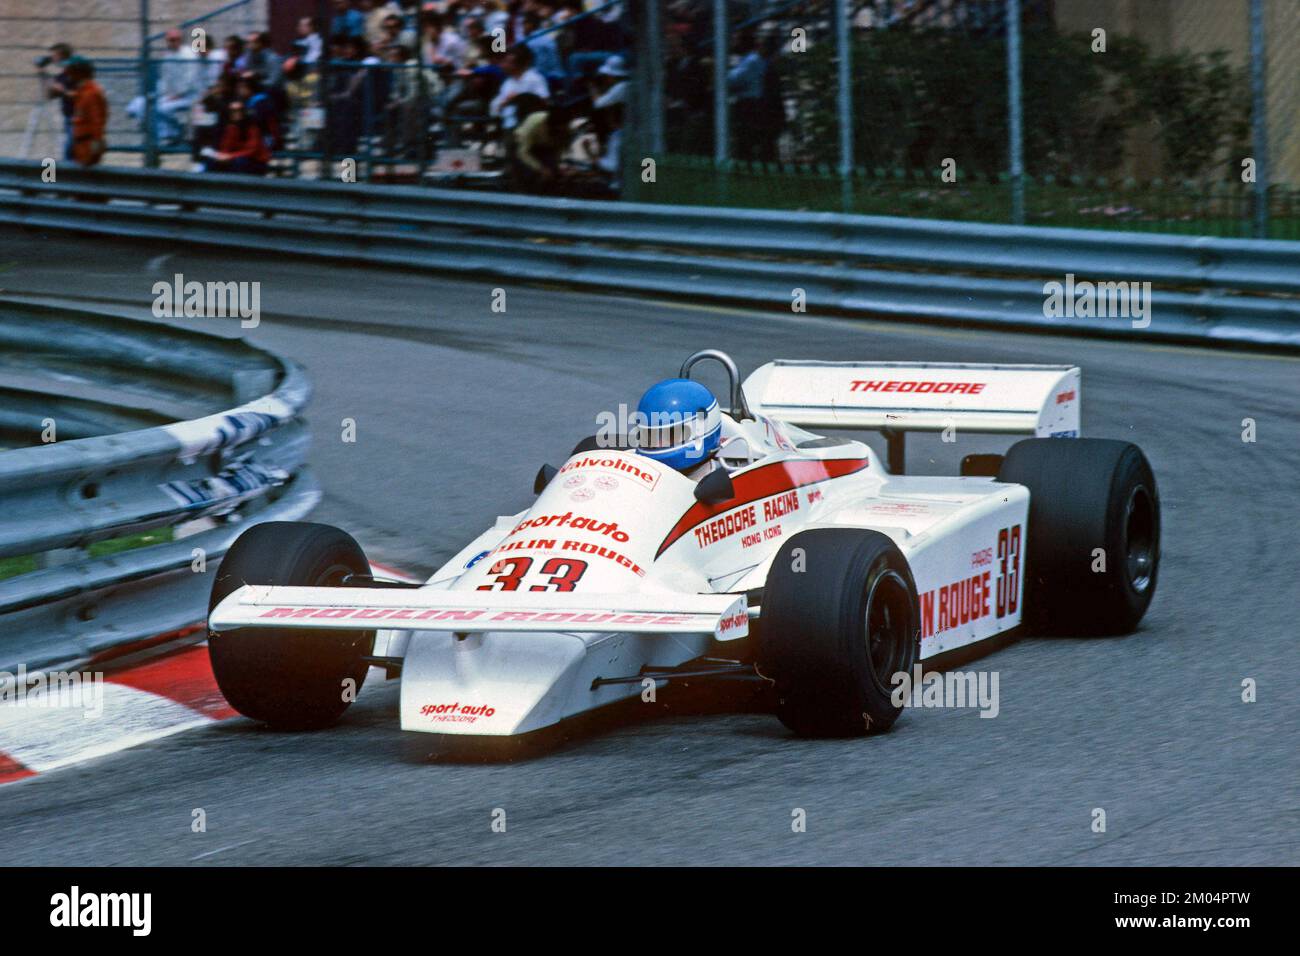 MOTORSPORT - F1 1981 - MONACO GP - MONTE-CARLO (mon) - 31/05/1981 - PHOTO : DPPI - Patrick TAMBAY - Theodore Racing Team - Theodore TY01 Ford Cosworth - action Banque D'Images